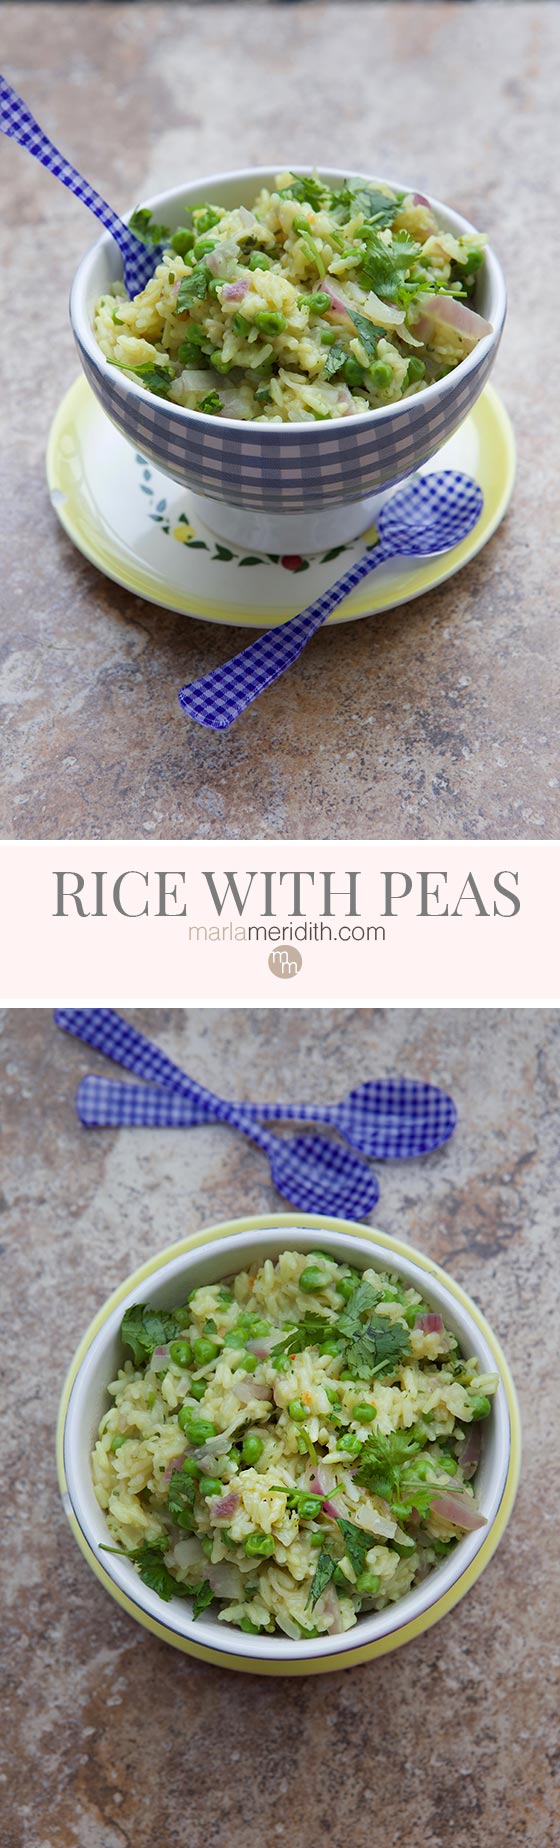 My Rice with Peas recipe is just that...simple, but delicious all the same! marlameridith.com